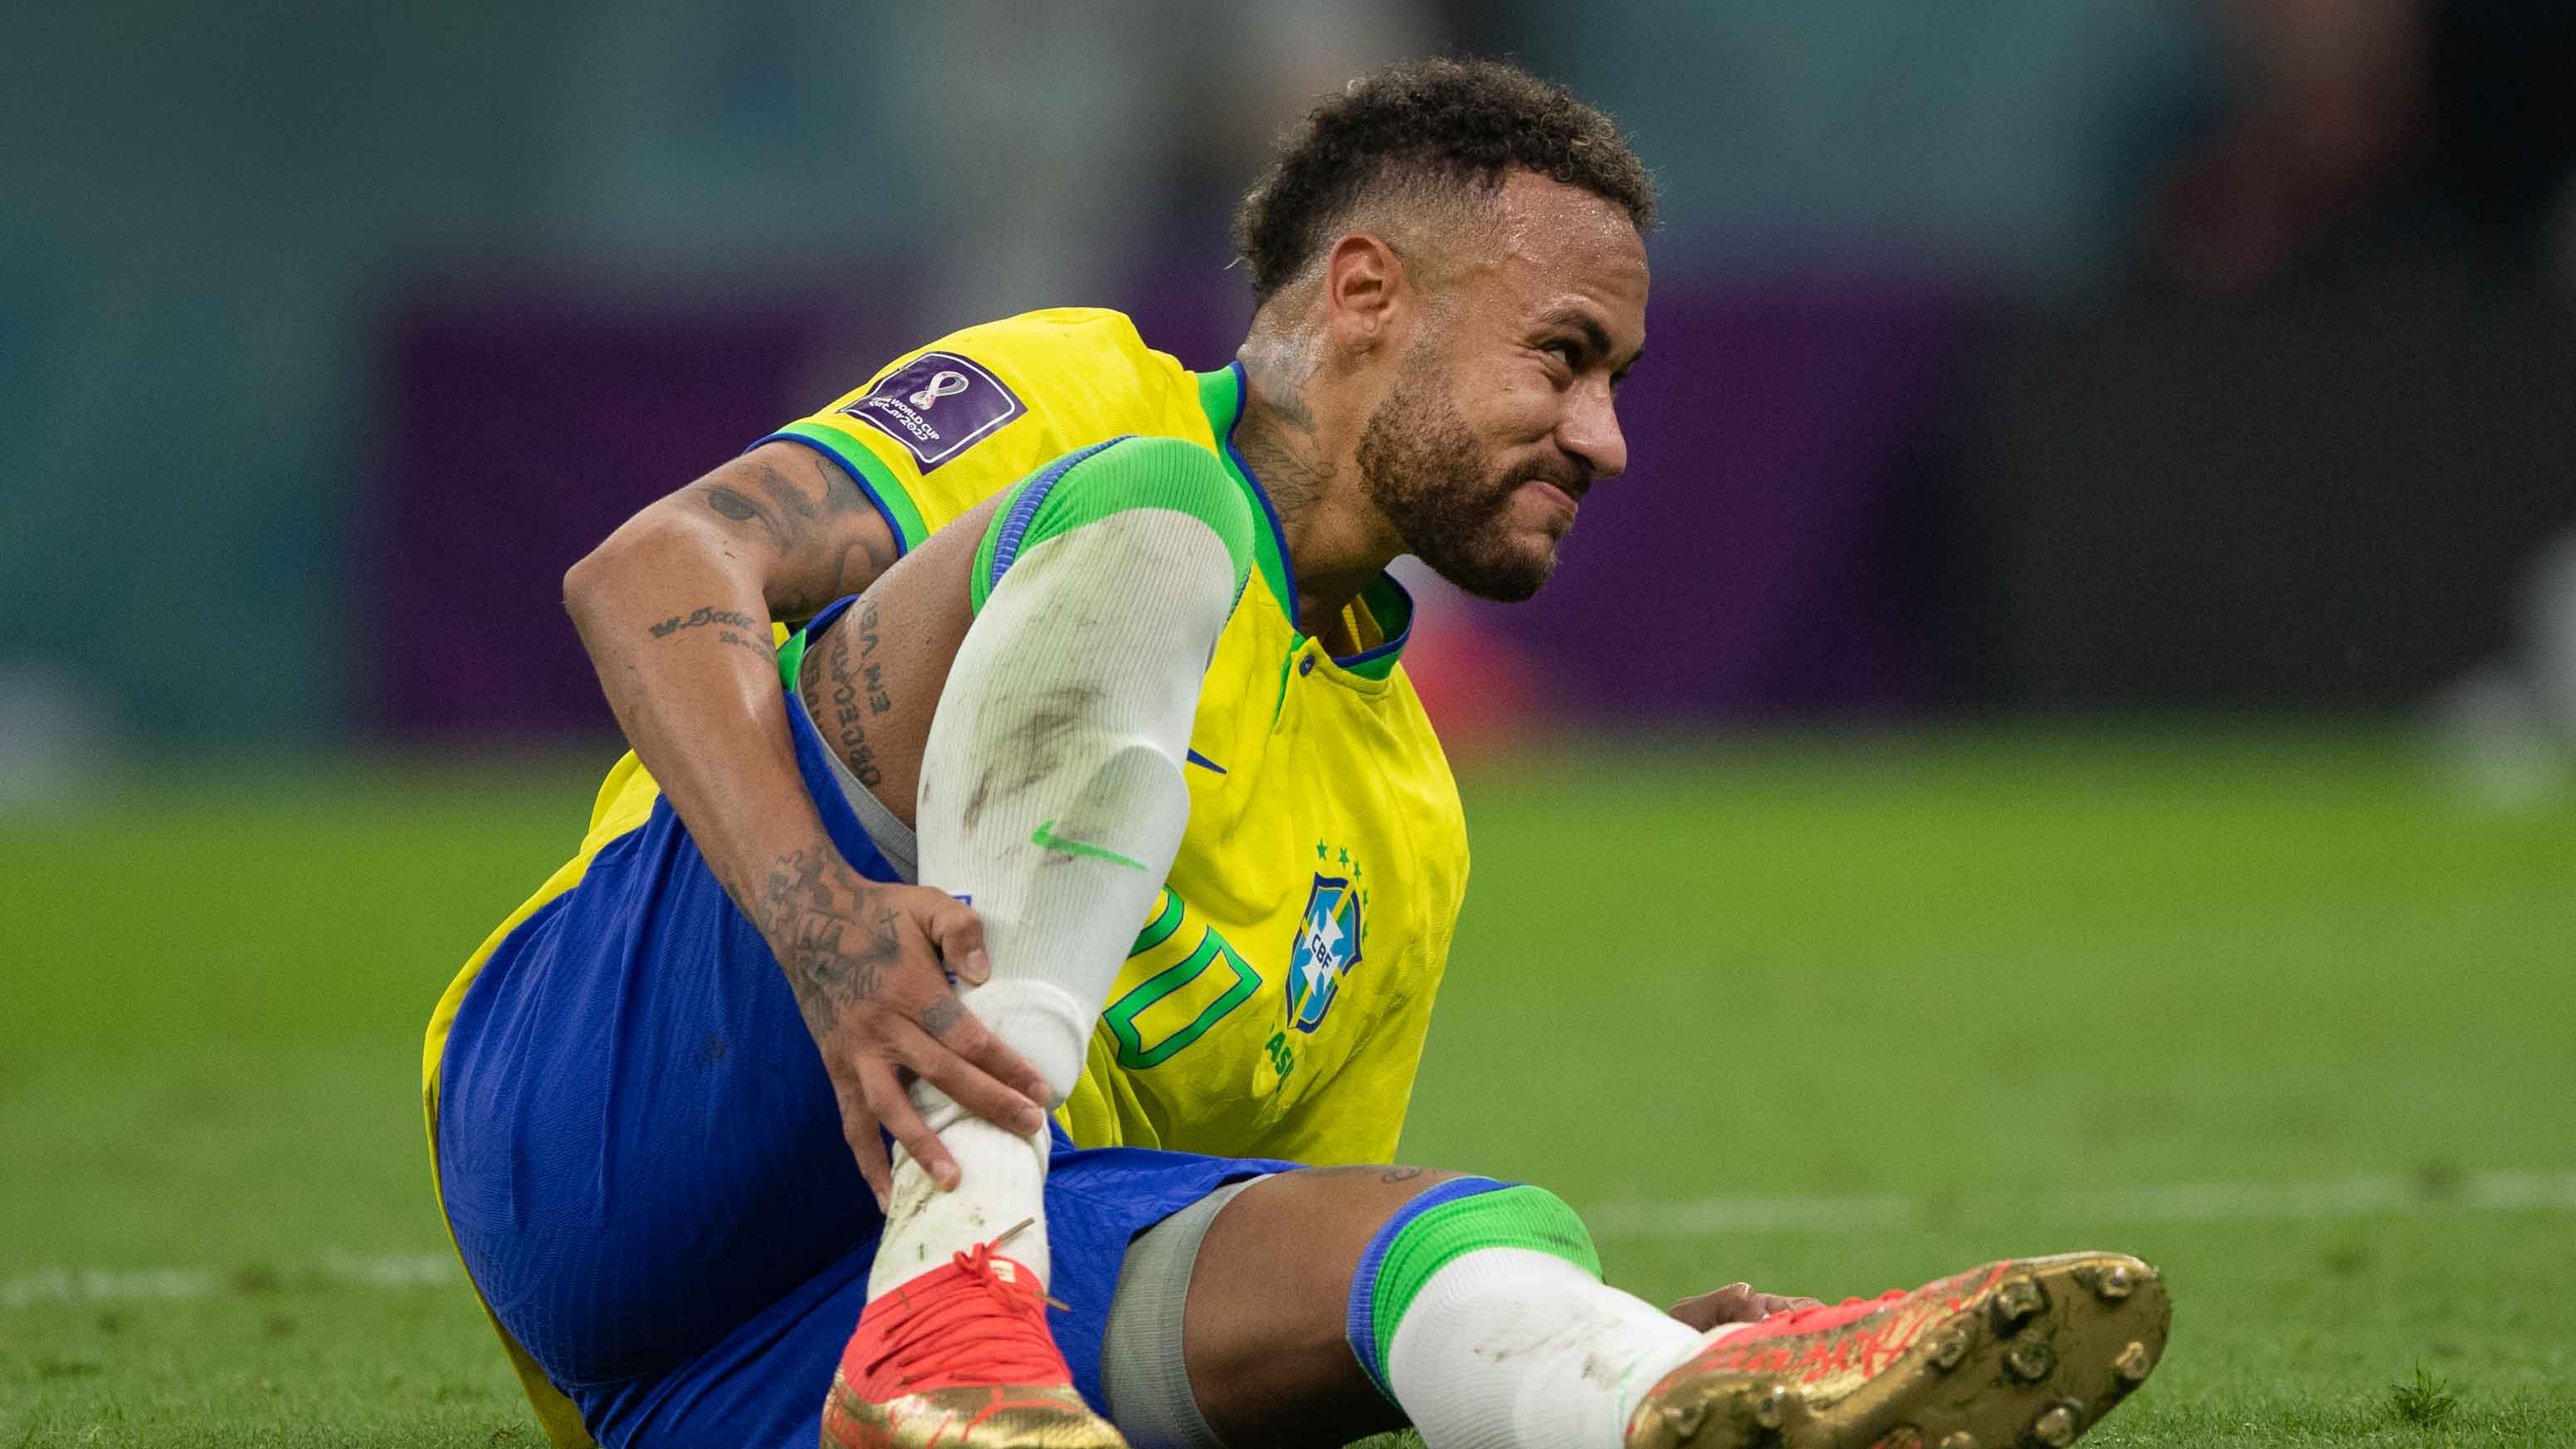 Report: Neymar Could Miss Rest of Group Play for Brazil